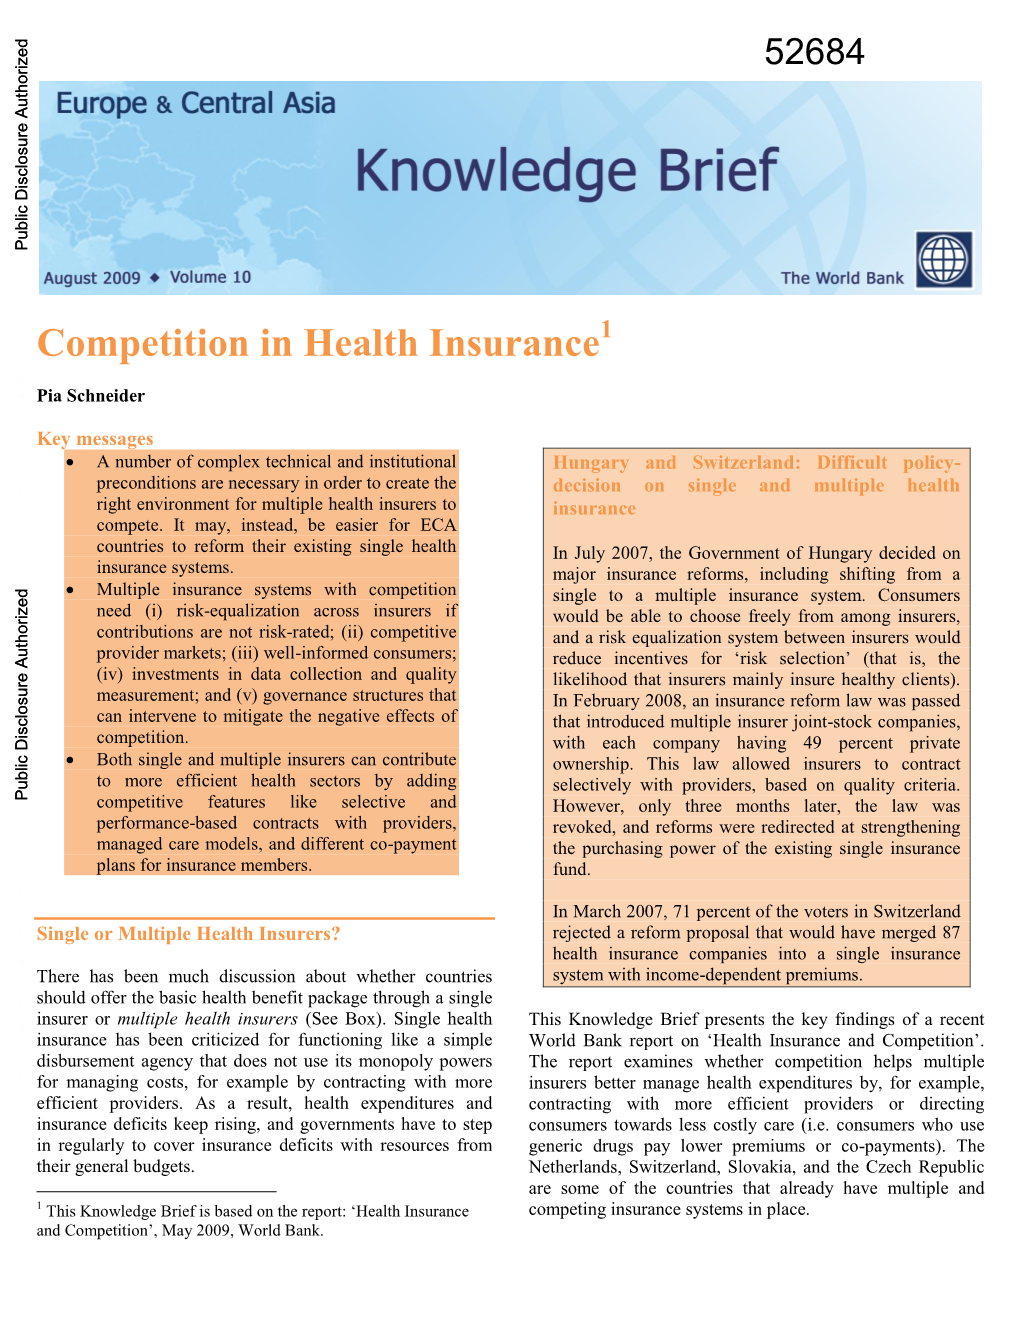 Competition in Health Insurance 1